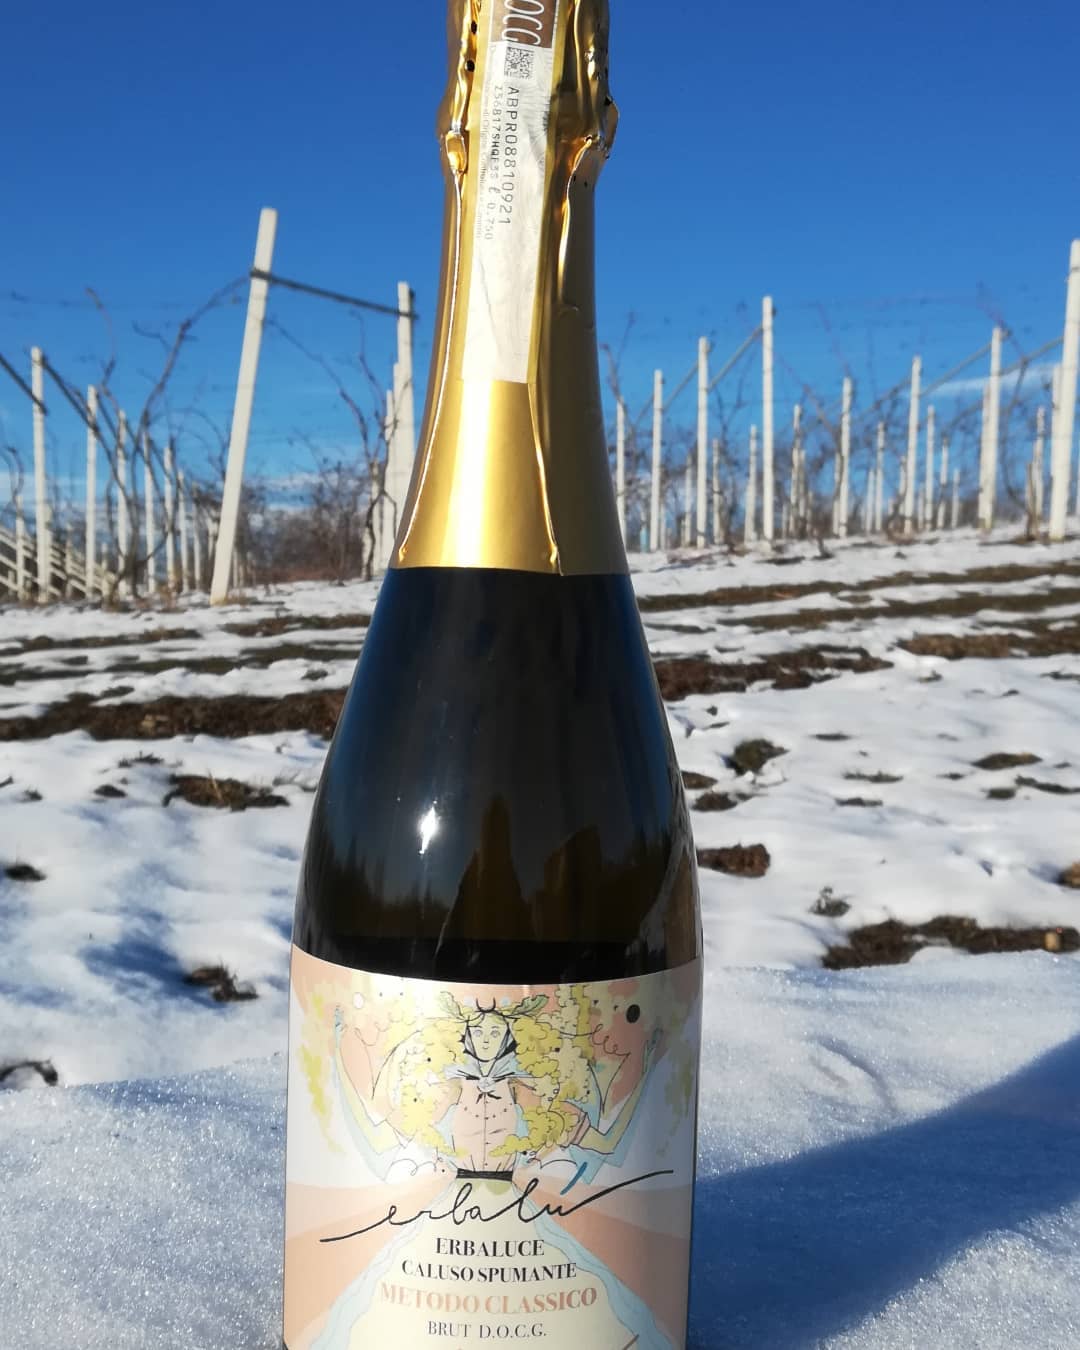 New Arrival! 🍾🍾🥂 Welcome #winepassion #winetasting #wine #winelover #sparklingwine #sparkling #spumante #spumantemetodoclassico #erbaluce #erbalucedicaluso #canavese #piemonte #piedmont #italia #italy #moncrivello #moncravel #piemont #vercelli #vercellese #ピエモンテ #イタリア #schaumwein